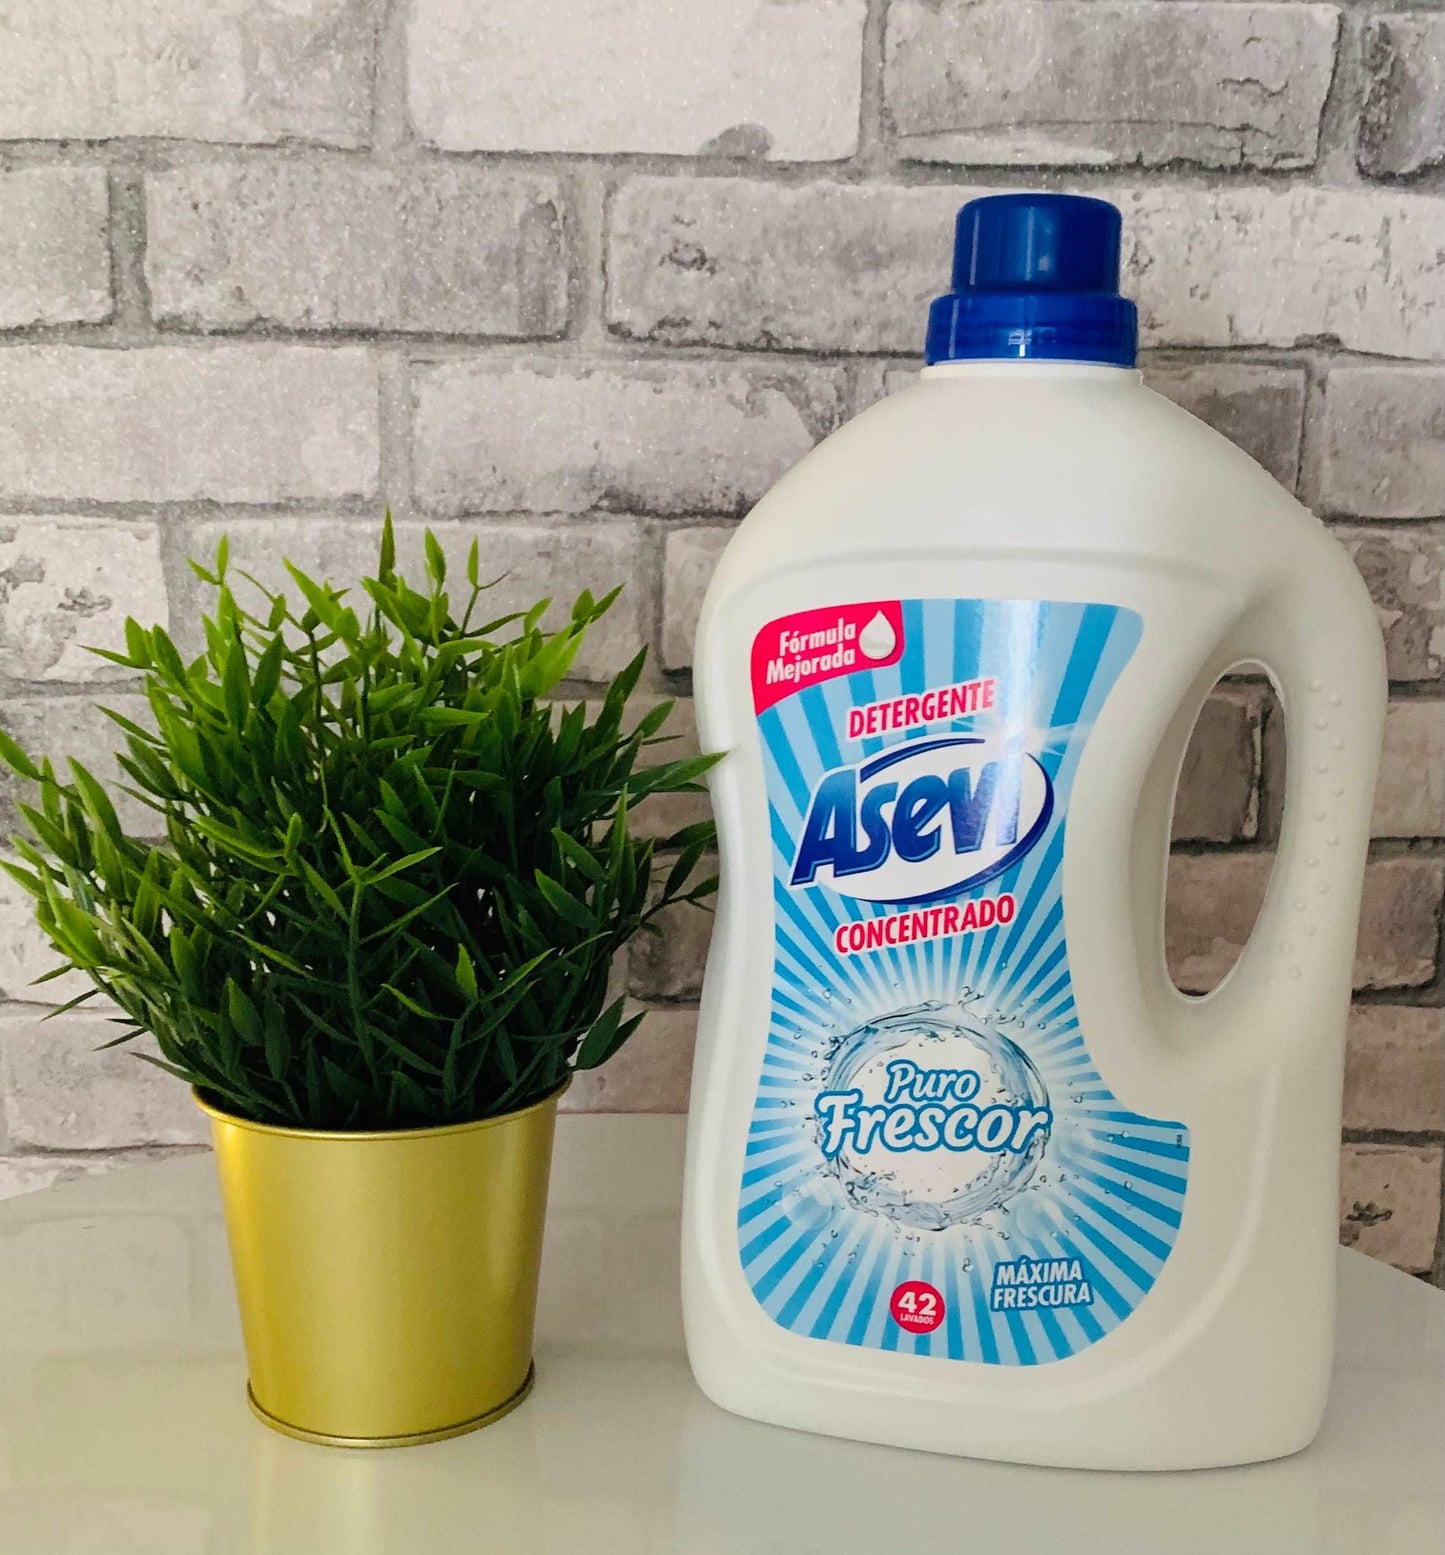 Asevi Puro Fresco - Concentrated Detergent - costadelsouthport.com